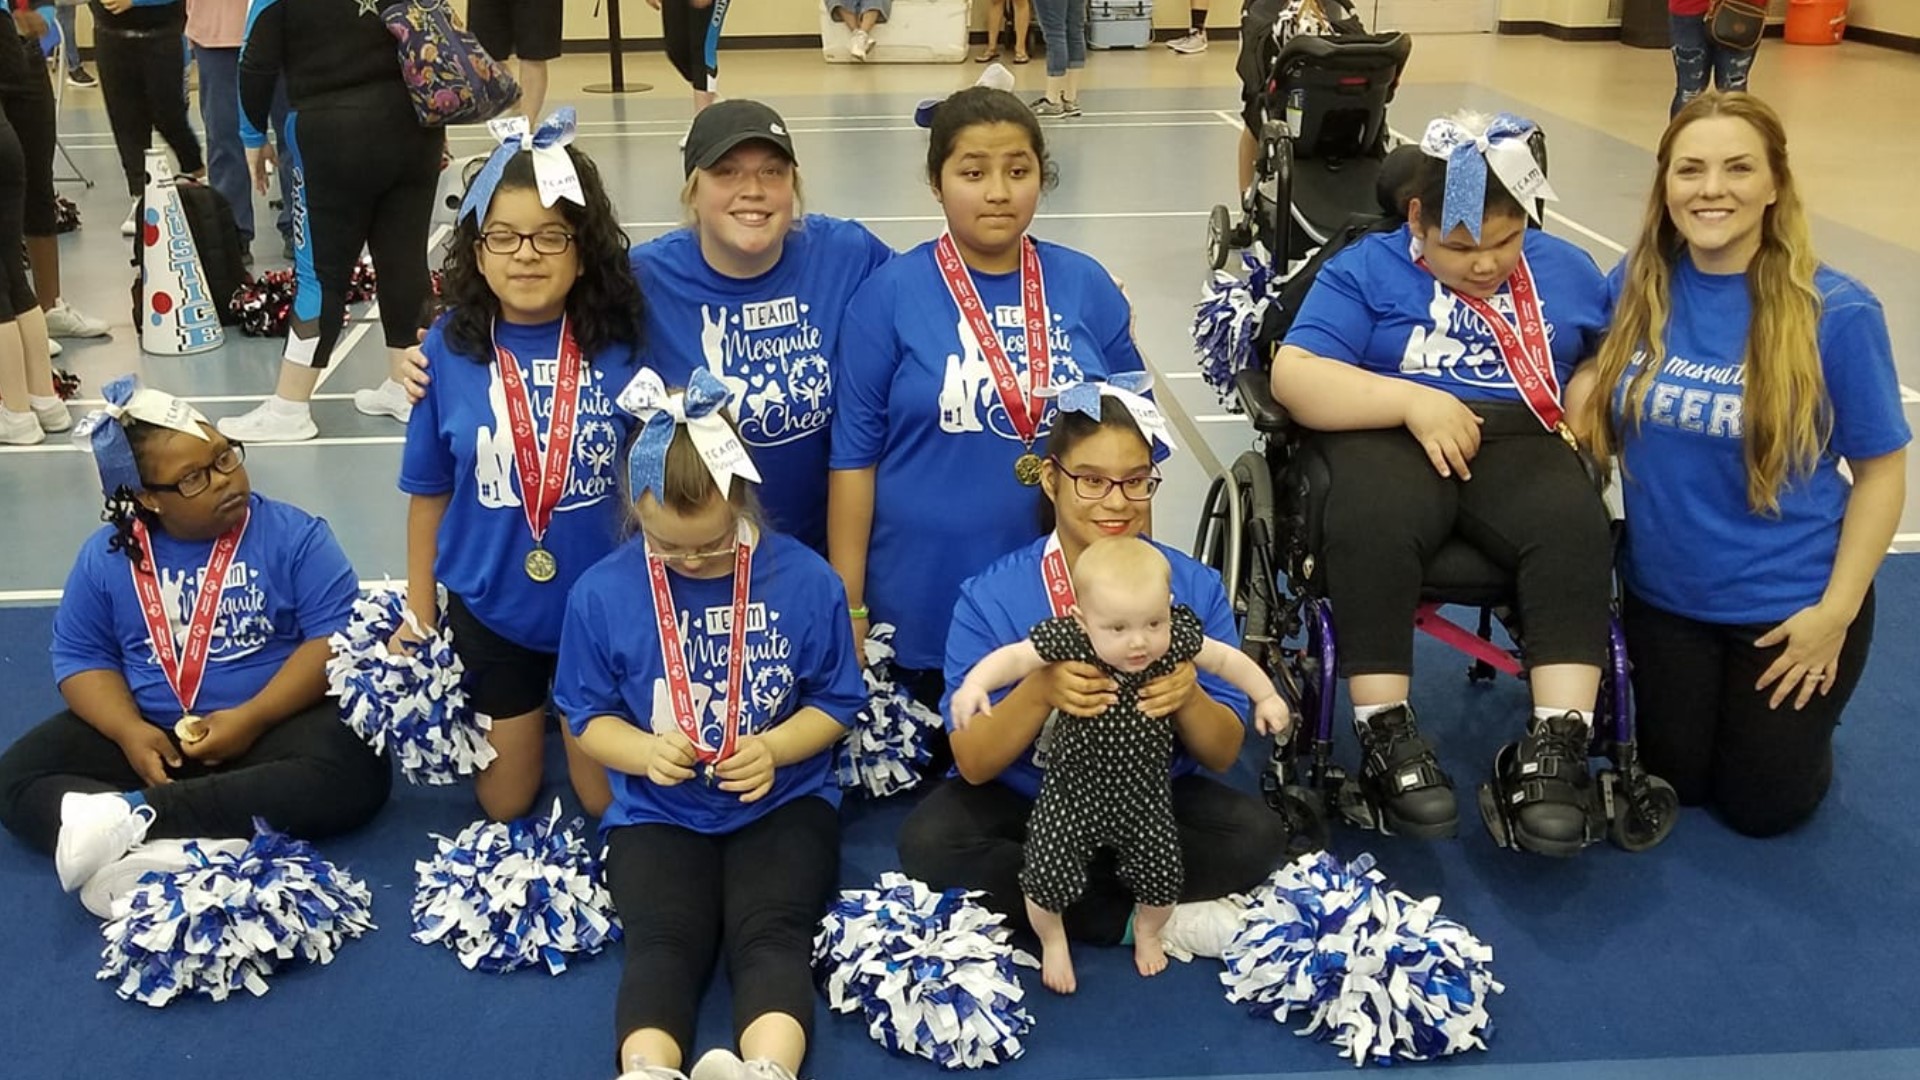 Team Mesquite Cheer was formed early last year. And they took home first place in their first ever competition Saturday.